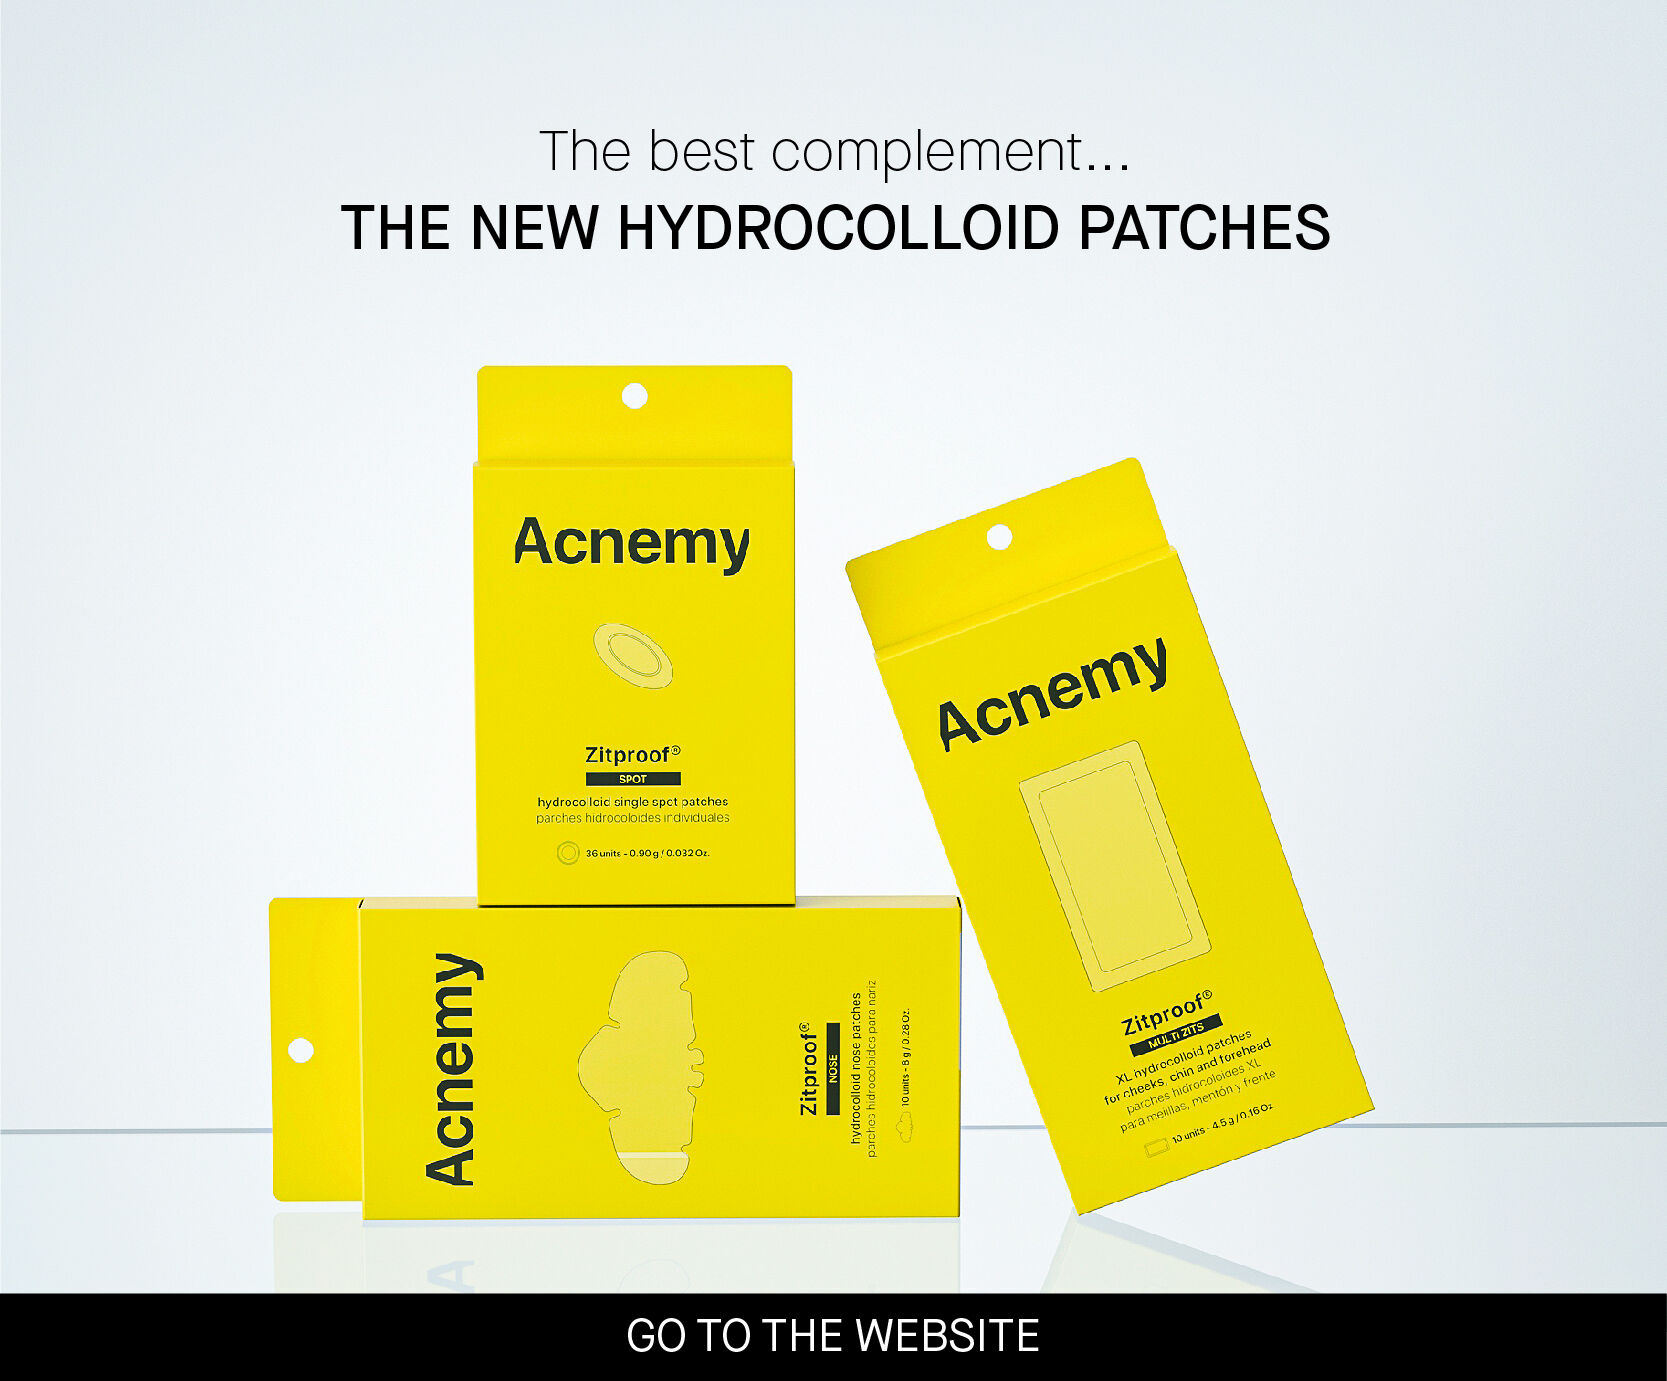 The best complement... THE NEW HYDROCOLLOID PATCHES Acnhemy Zitproof Achemy GO TO THE WEBSITE 